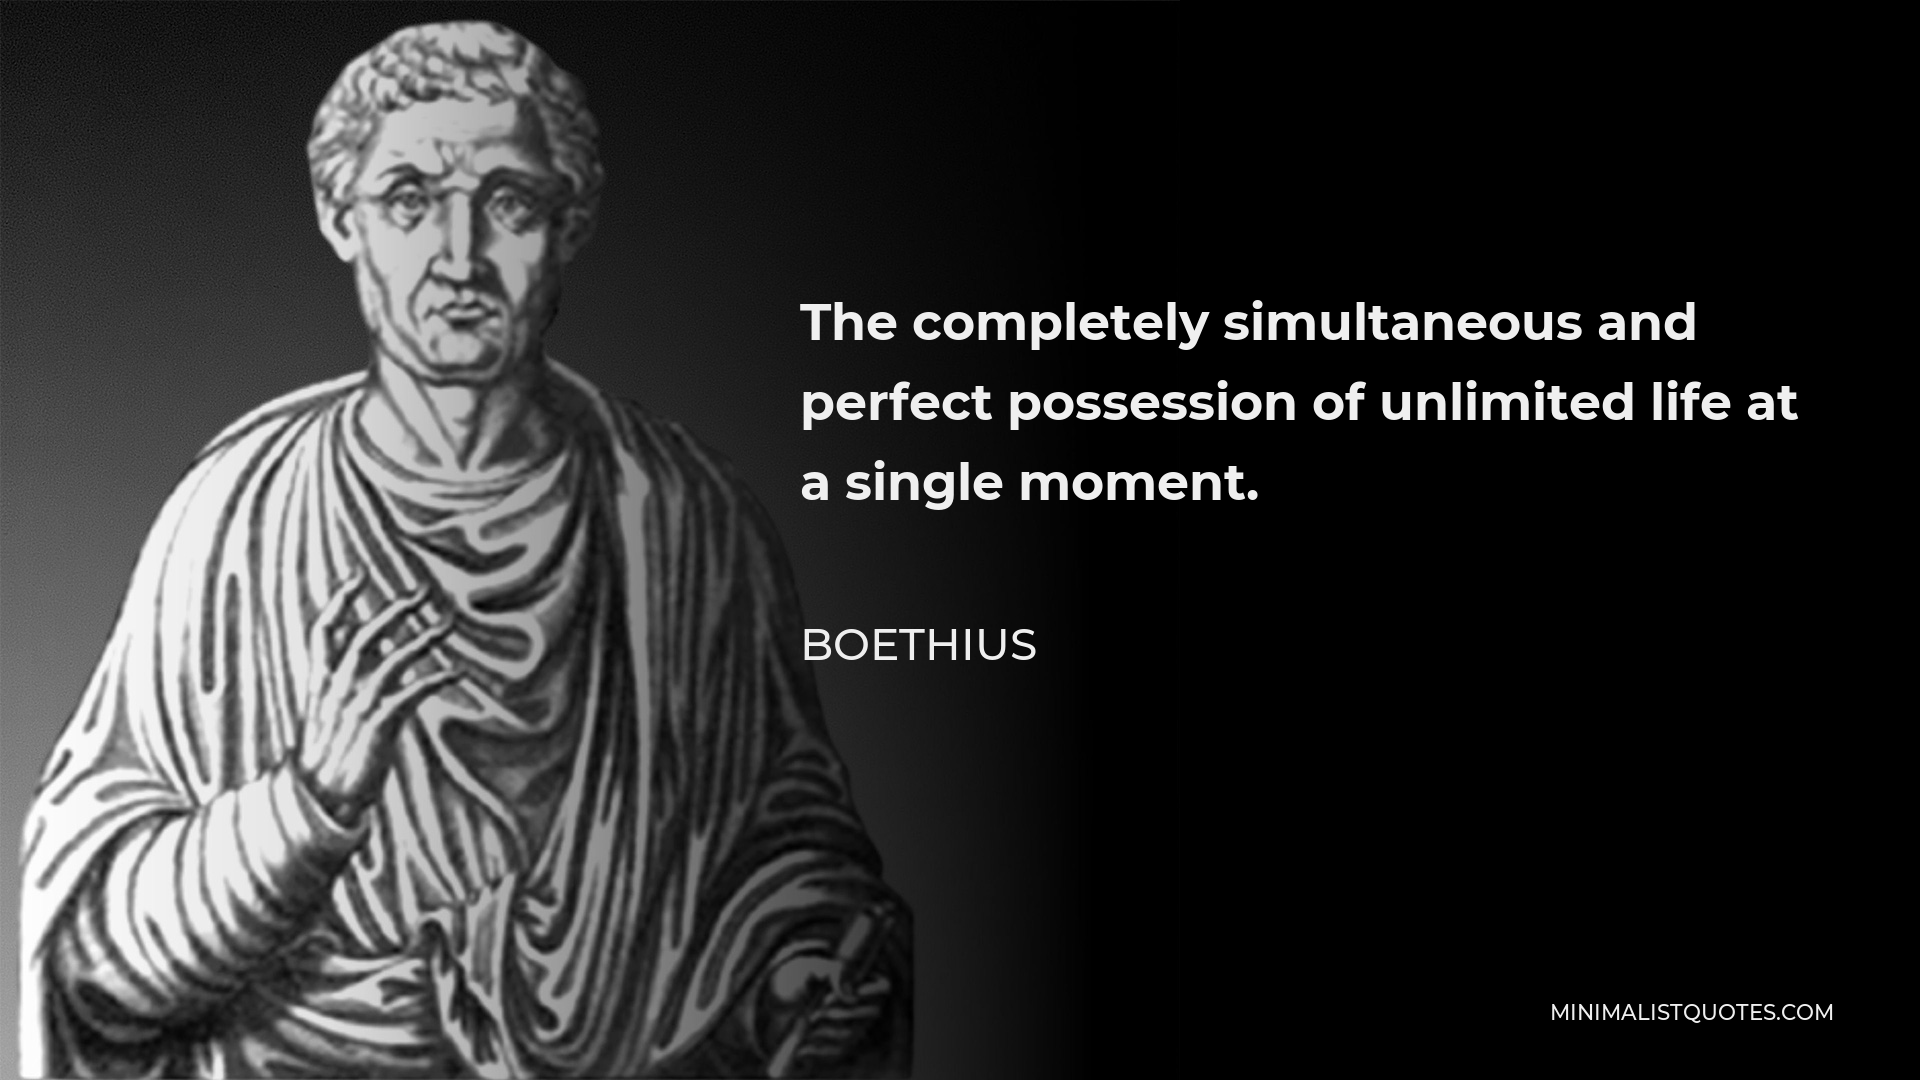 Boethius Quote - The completely simultaneous and perfect possession of unlimited life at a single moment.